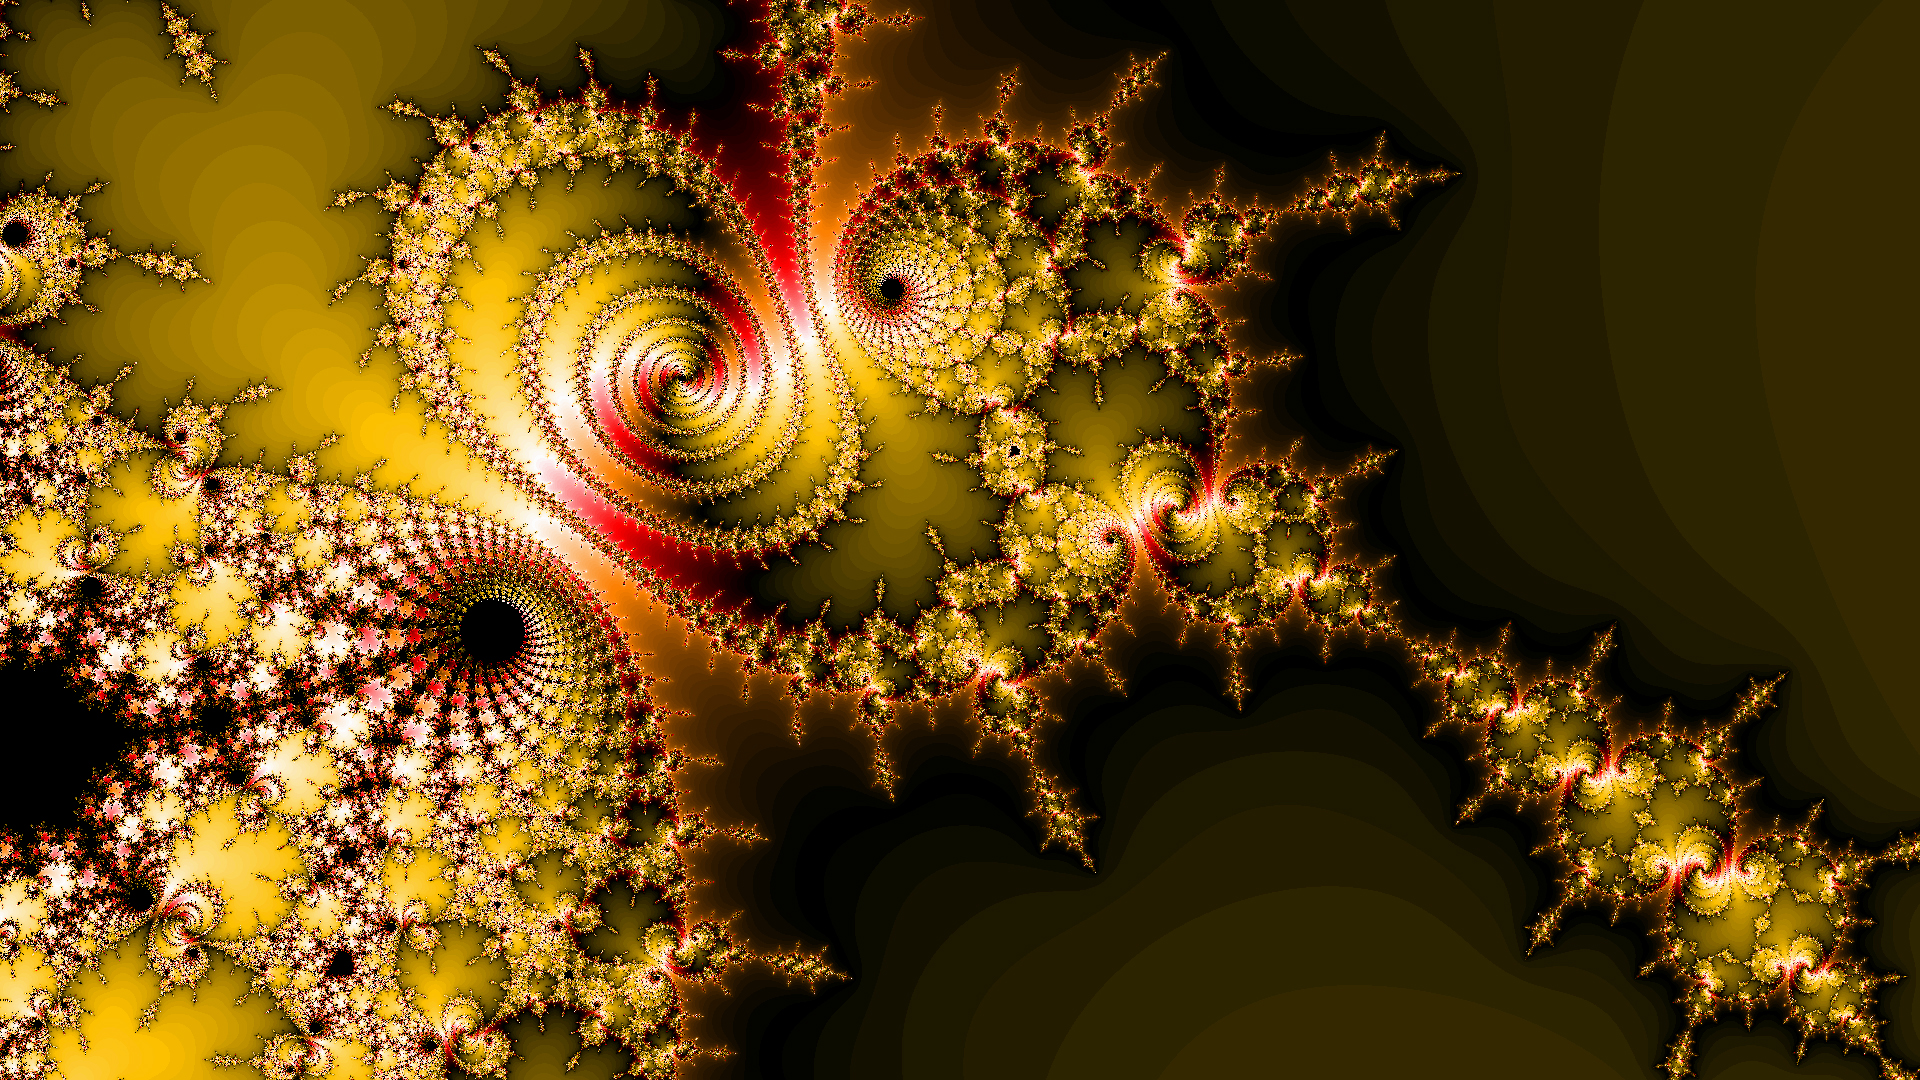 Abstract Artistic Colors Digital Art Fractal Gradient Spiral Yellow 1920x1080